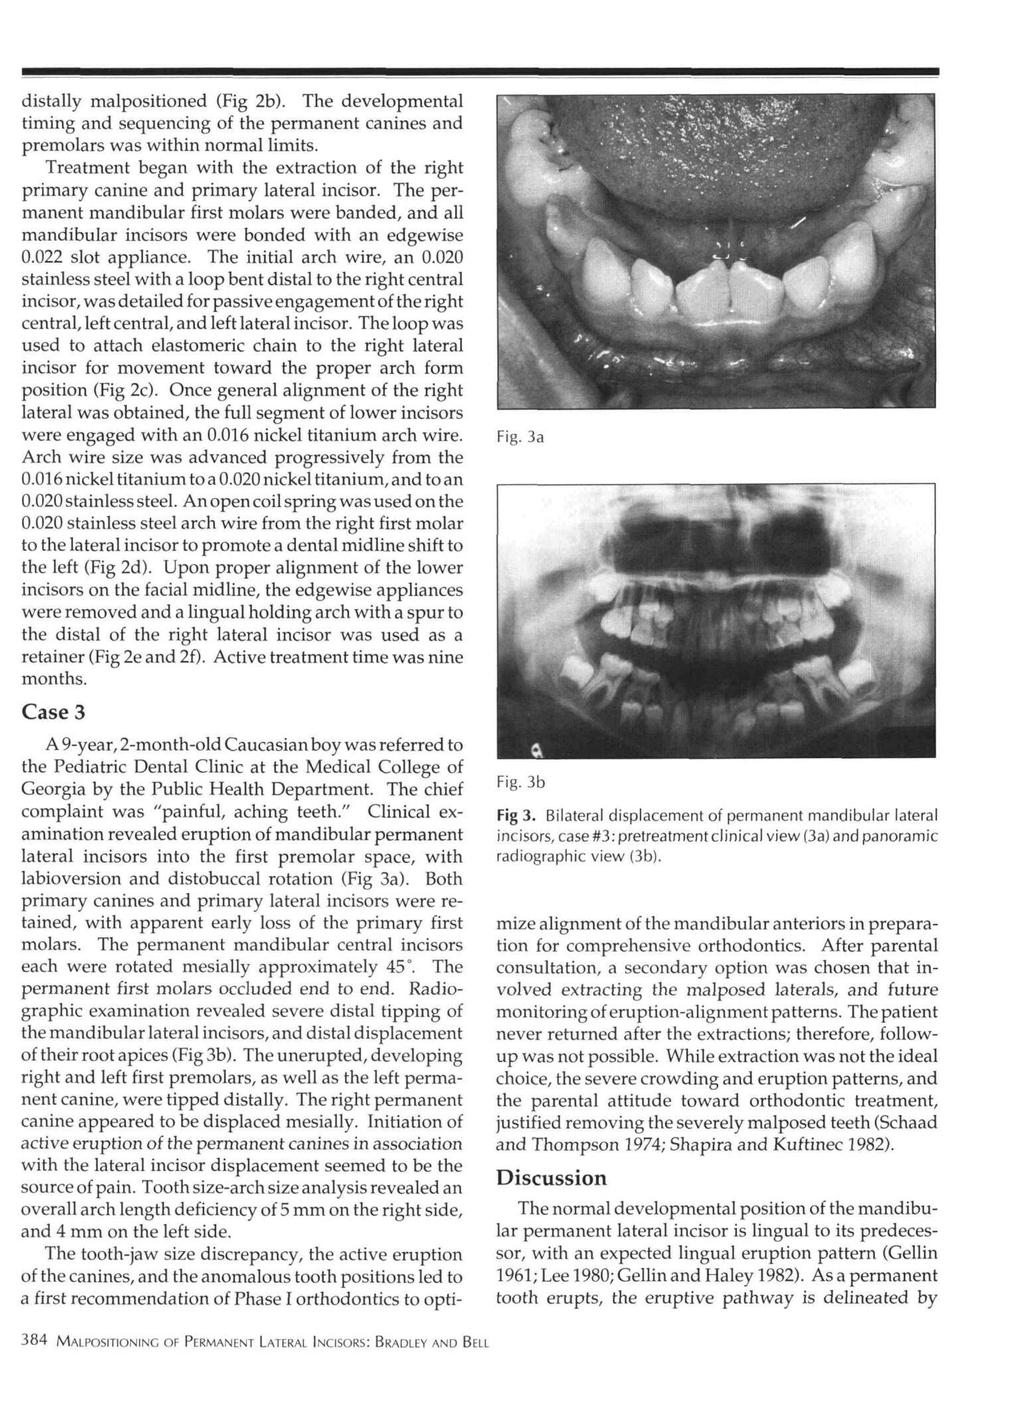 distally malpositioned (Fig 2b). The developmental timing and sequencing of the permanent canines and premolars was within normal limits.